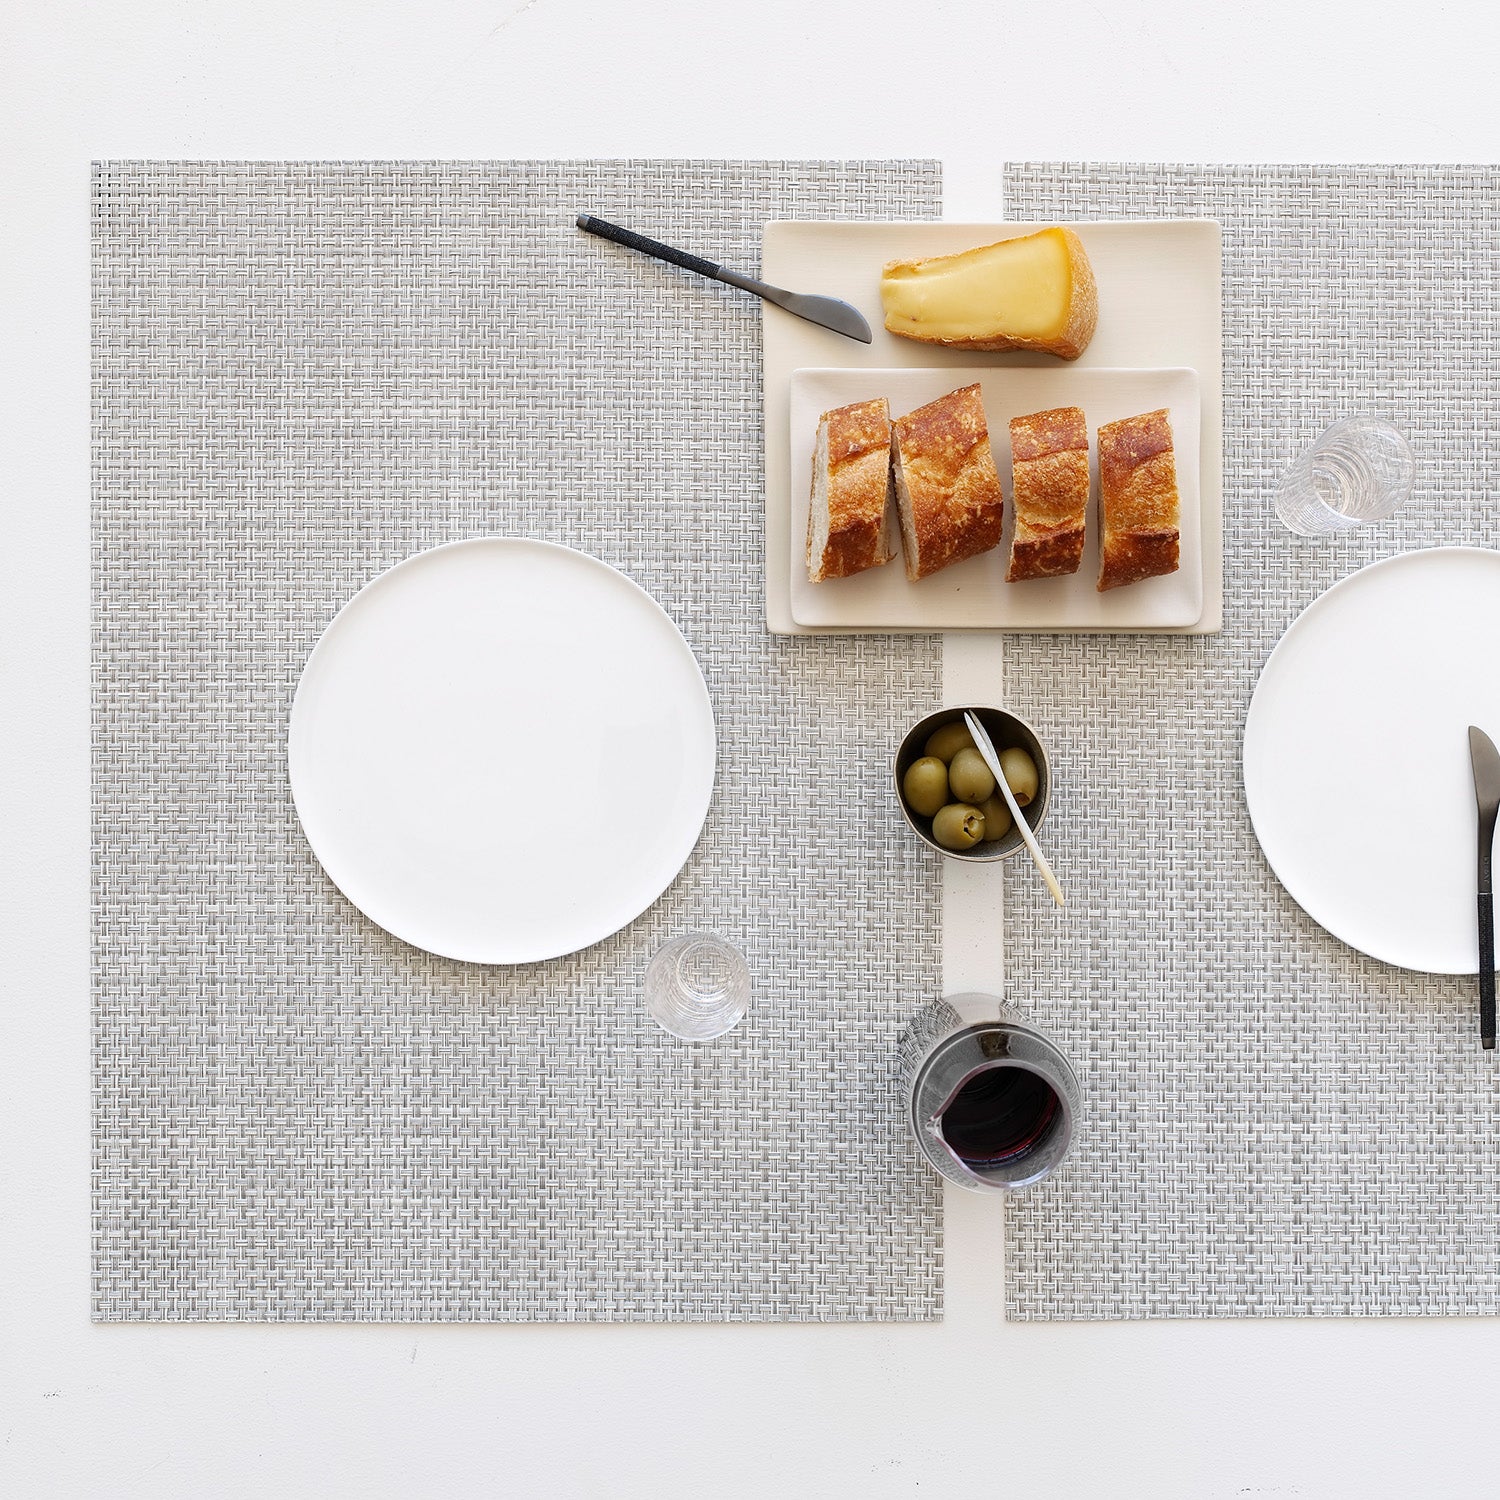 Chilewich Placemat - Basketweave - White/Silver